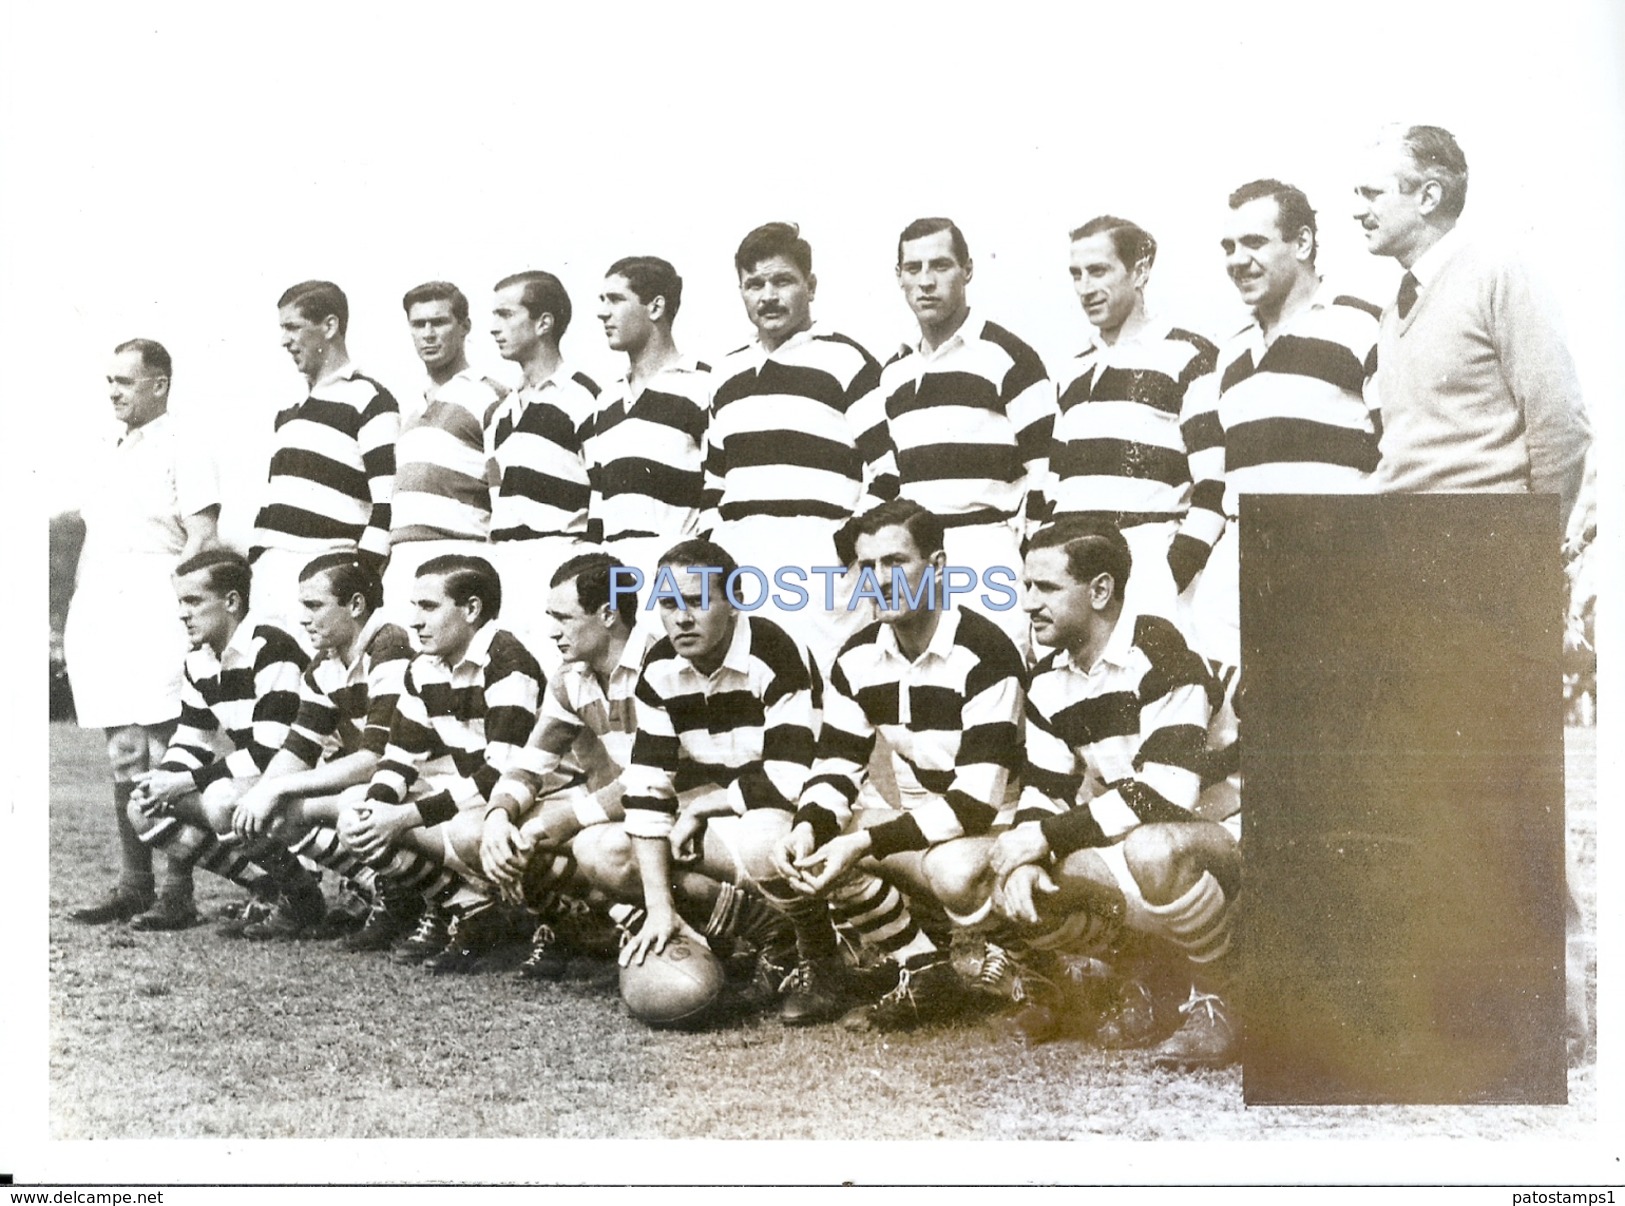 71857 ARGENTINA SPORTS RUGBY CLUB ATLETICO SAN ISIDRO EQUIPO 1º DIVISION 24 X 18 CM PHOTO NO POSTAL POSTCARD - Rugby